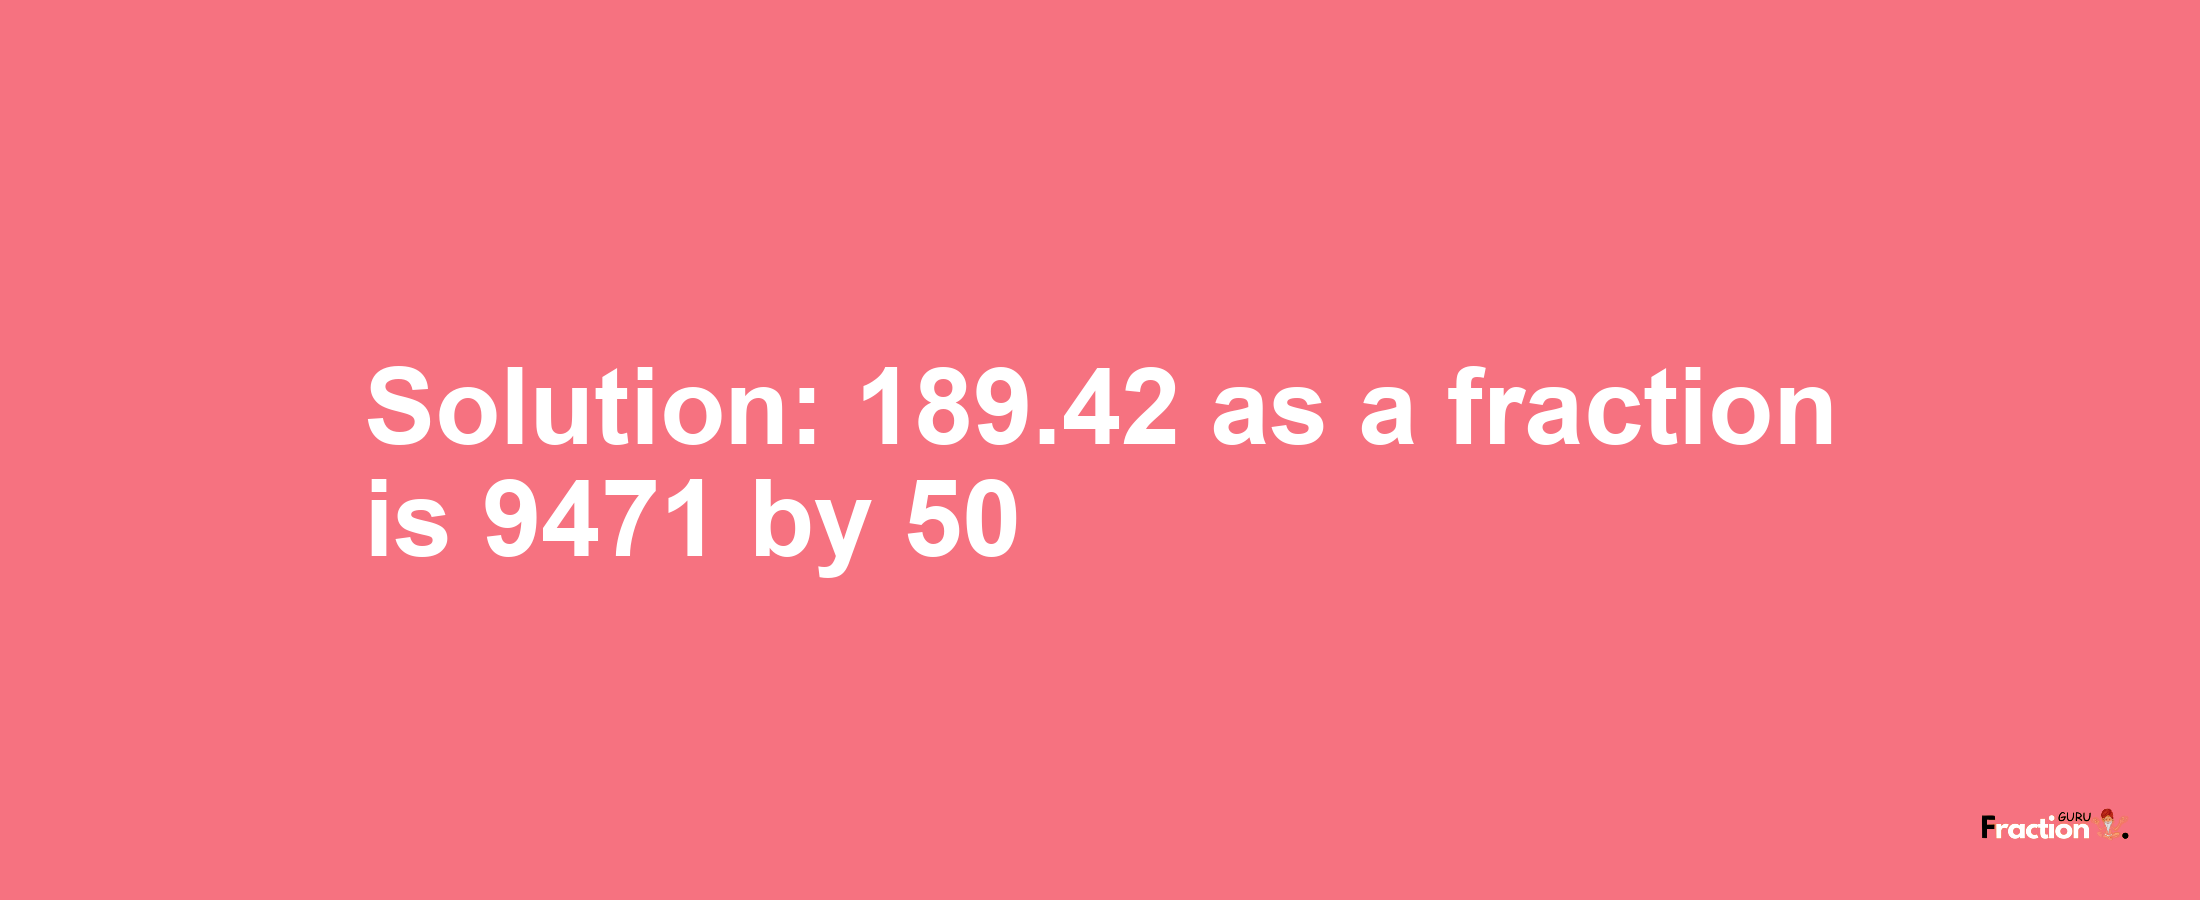 Solution:189.42 as a fraction is 9471/50